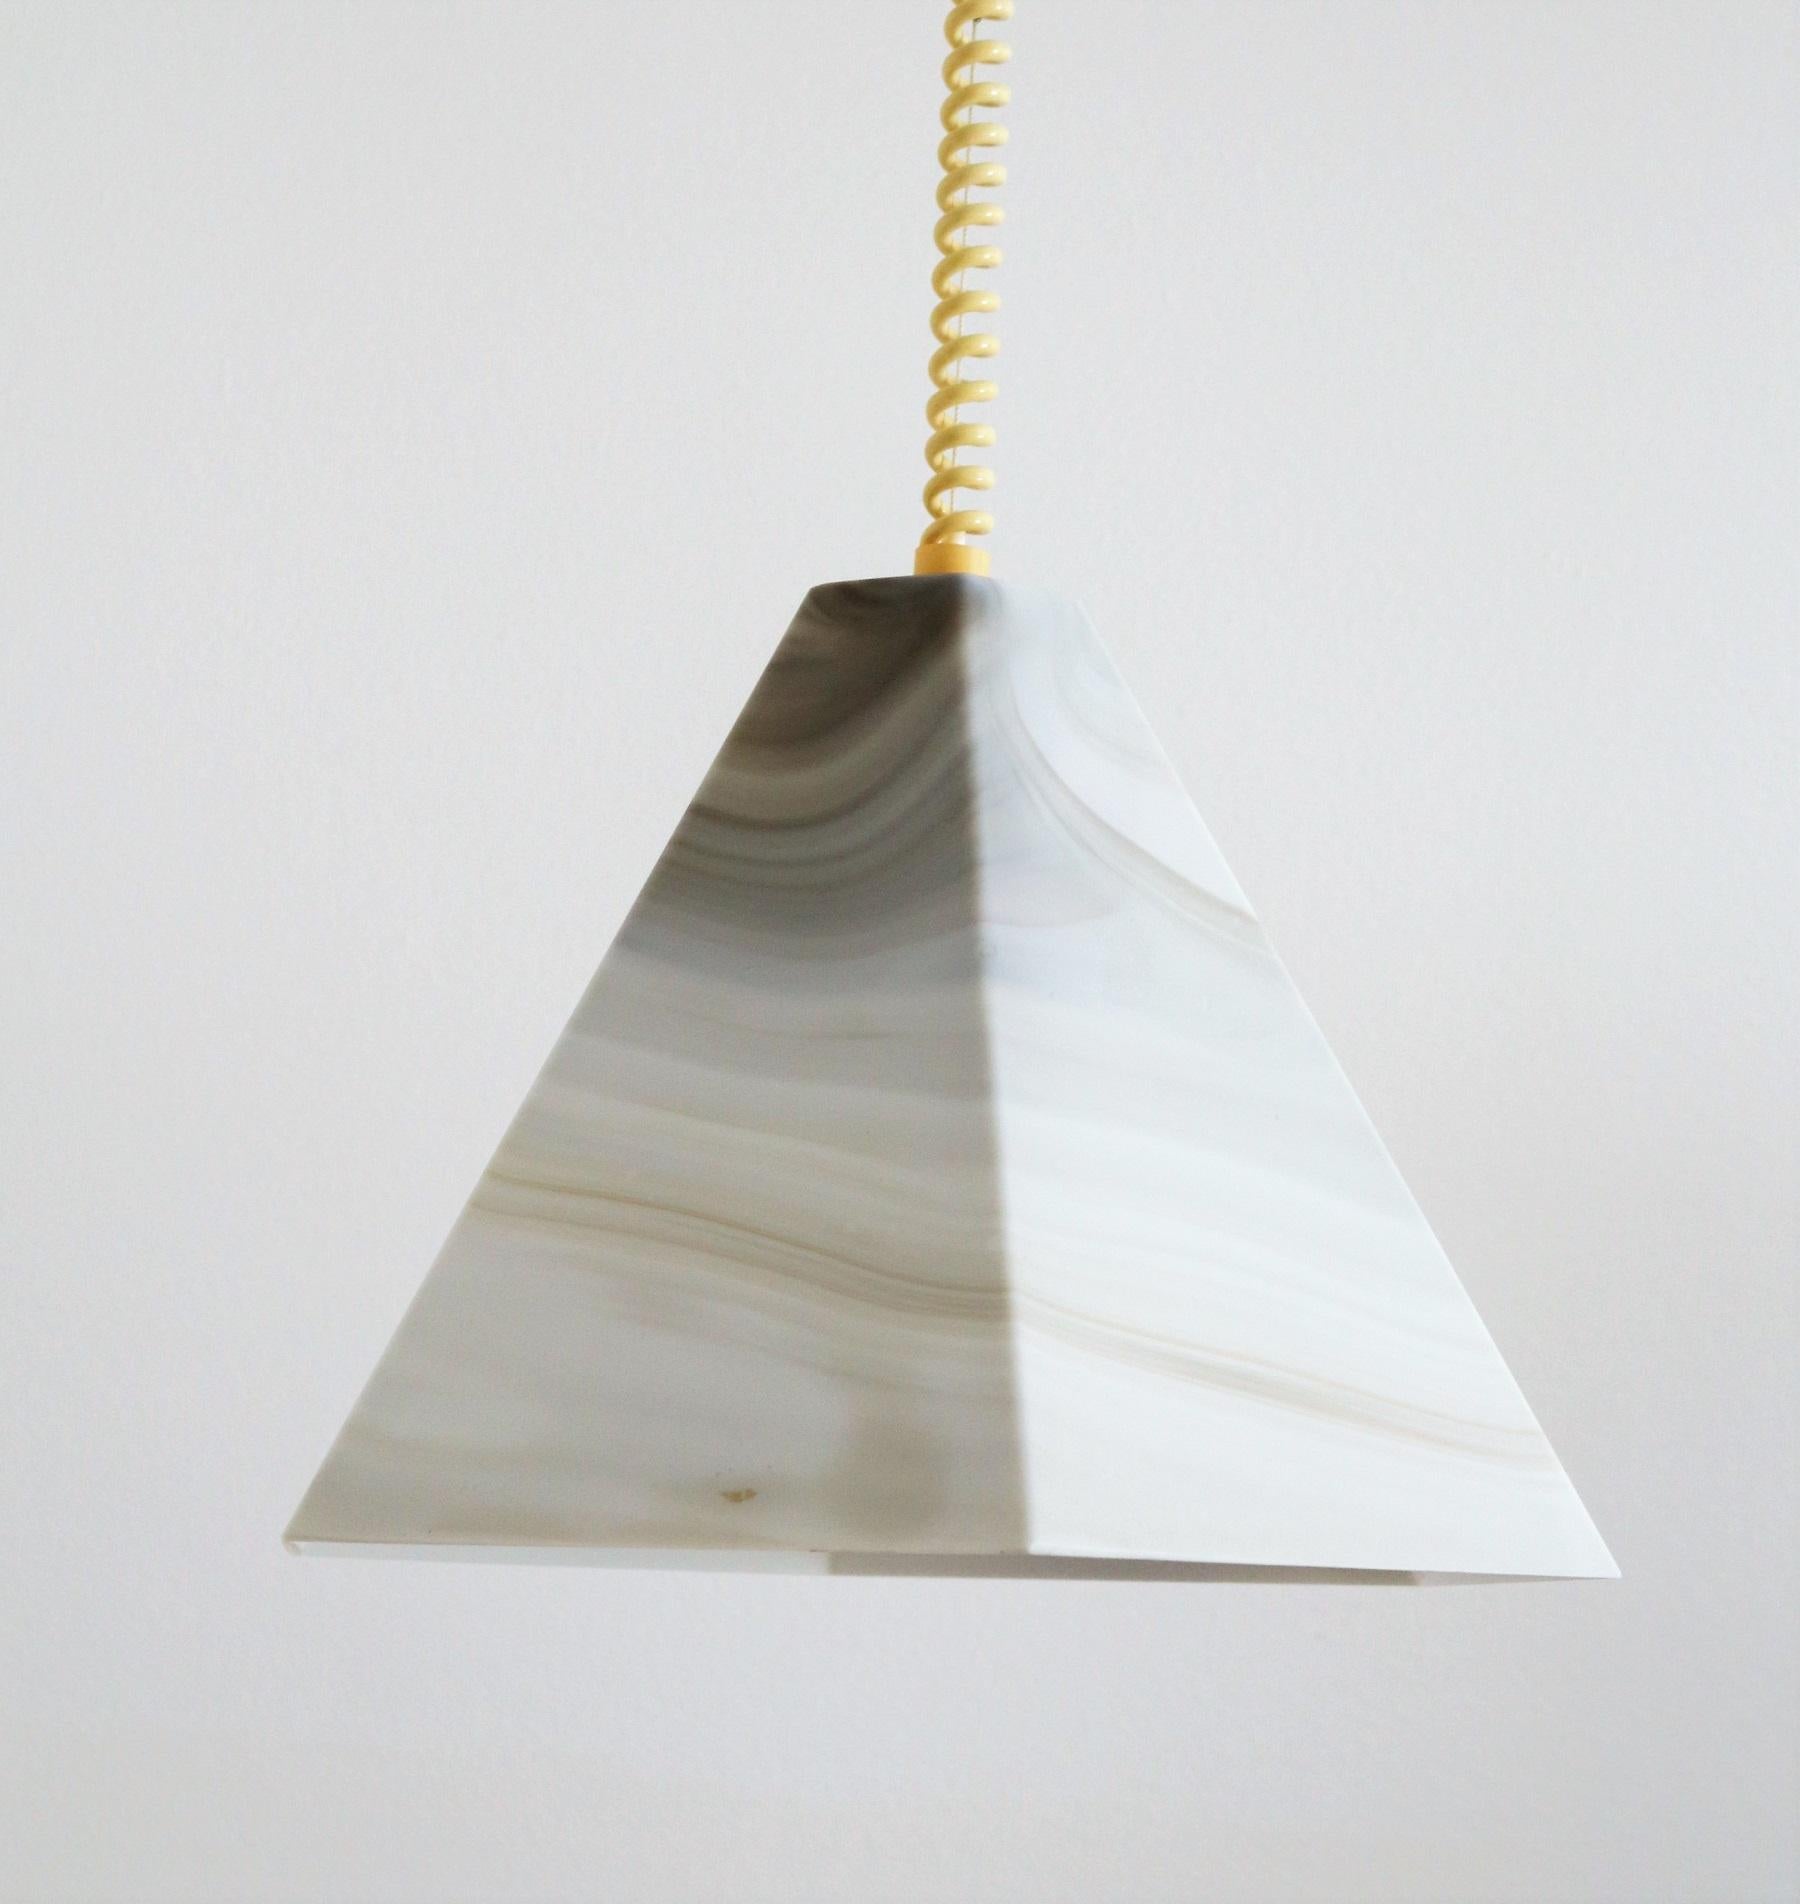 Particular hexagonal pendant lamp in white glass with magnificent marble effect.
Made in Germany by Peill and Putzler in the 1970s.
The pendant lamp is in its original version with original curly cable in very good vintage and working